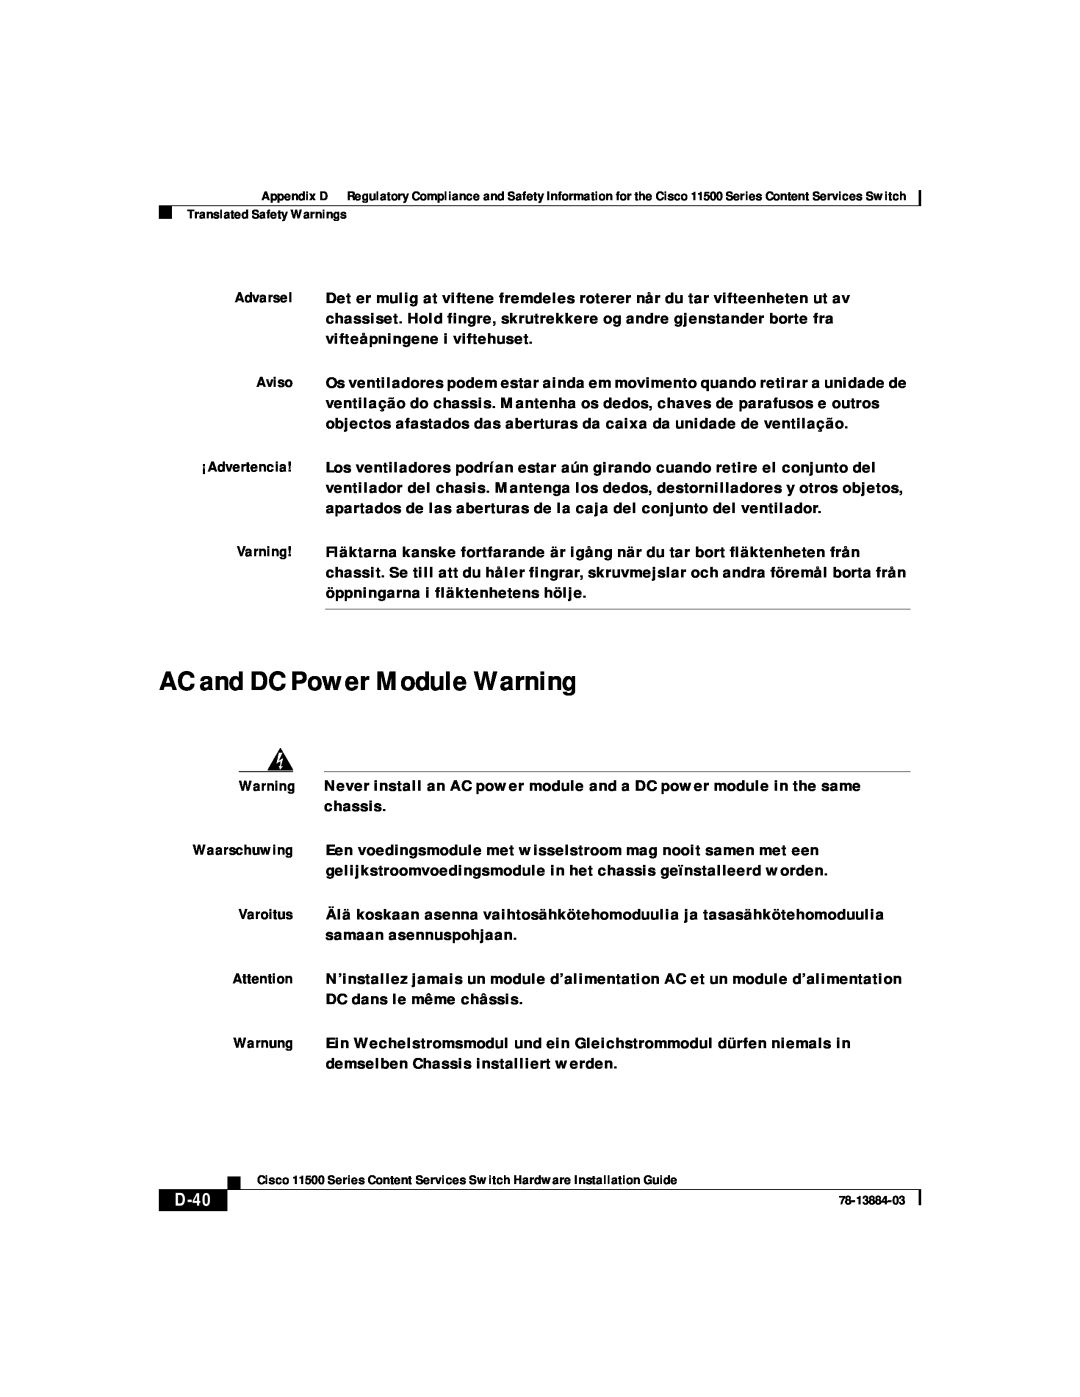 Cisco Systems 11500 Series manual AC and DC Power Module Warning, D-40 